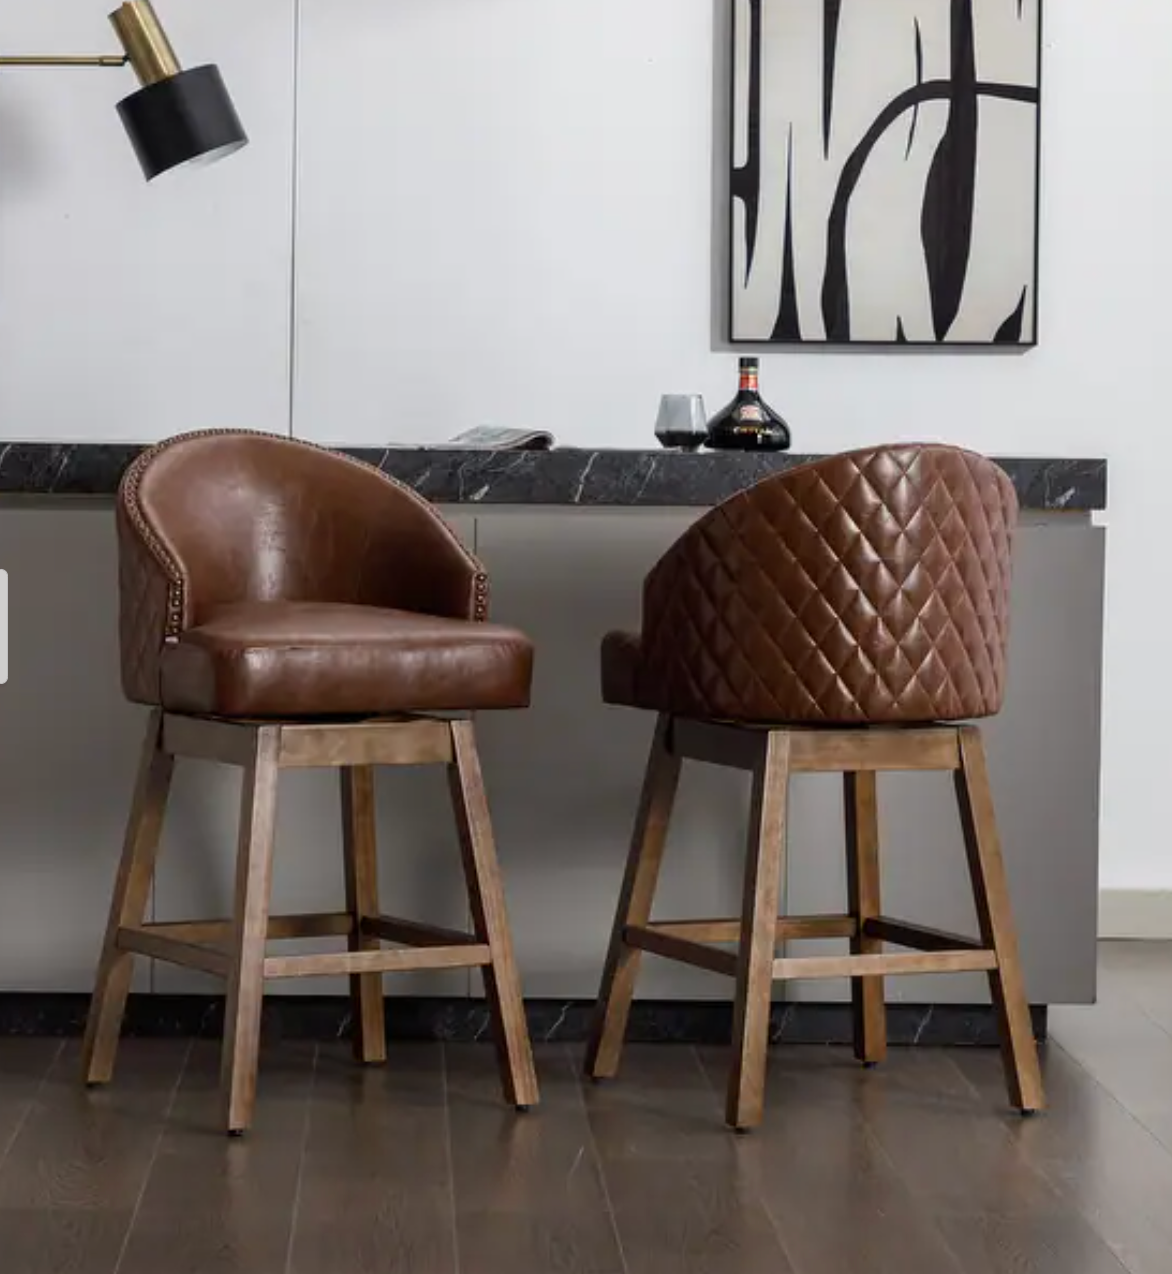 SWIVEL WOOD BASE COUNTER HEIGHT BROWN LEATHER BAR STOOL